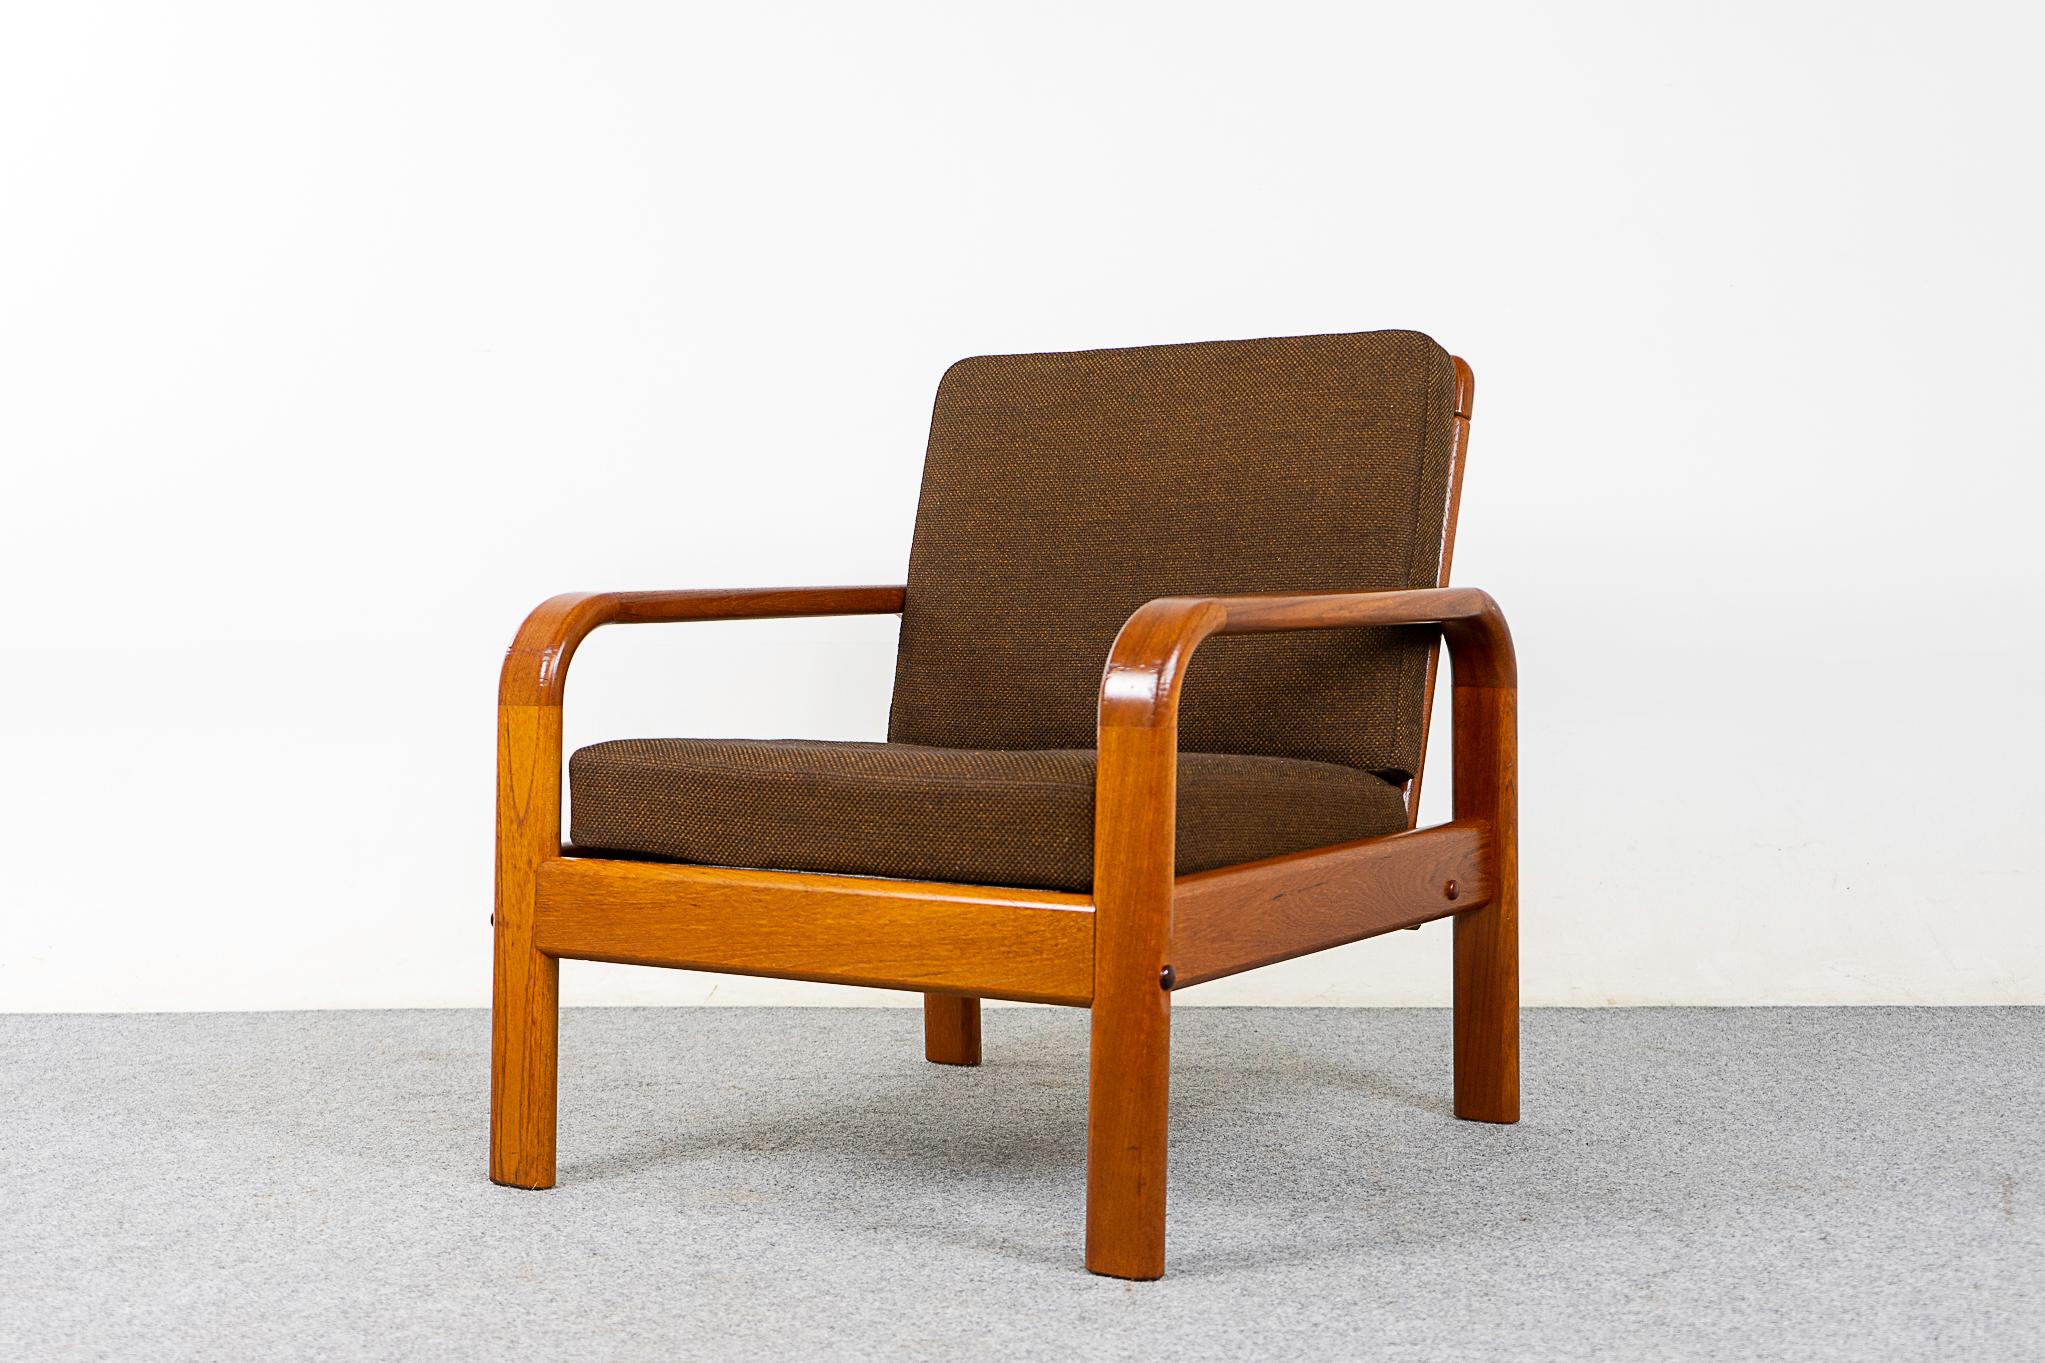 Teak mid-century lounge chair, circa 1960's. Sculpted solid frame with beautiful smooth joinery. Robust design with original cushions, in nice condition!